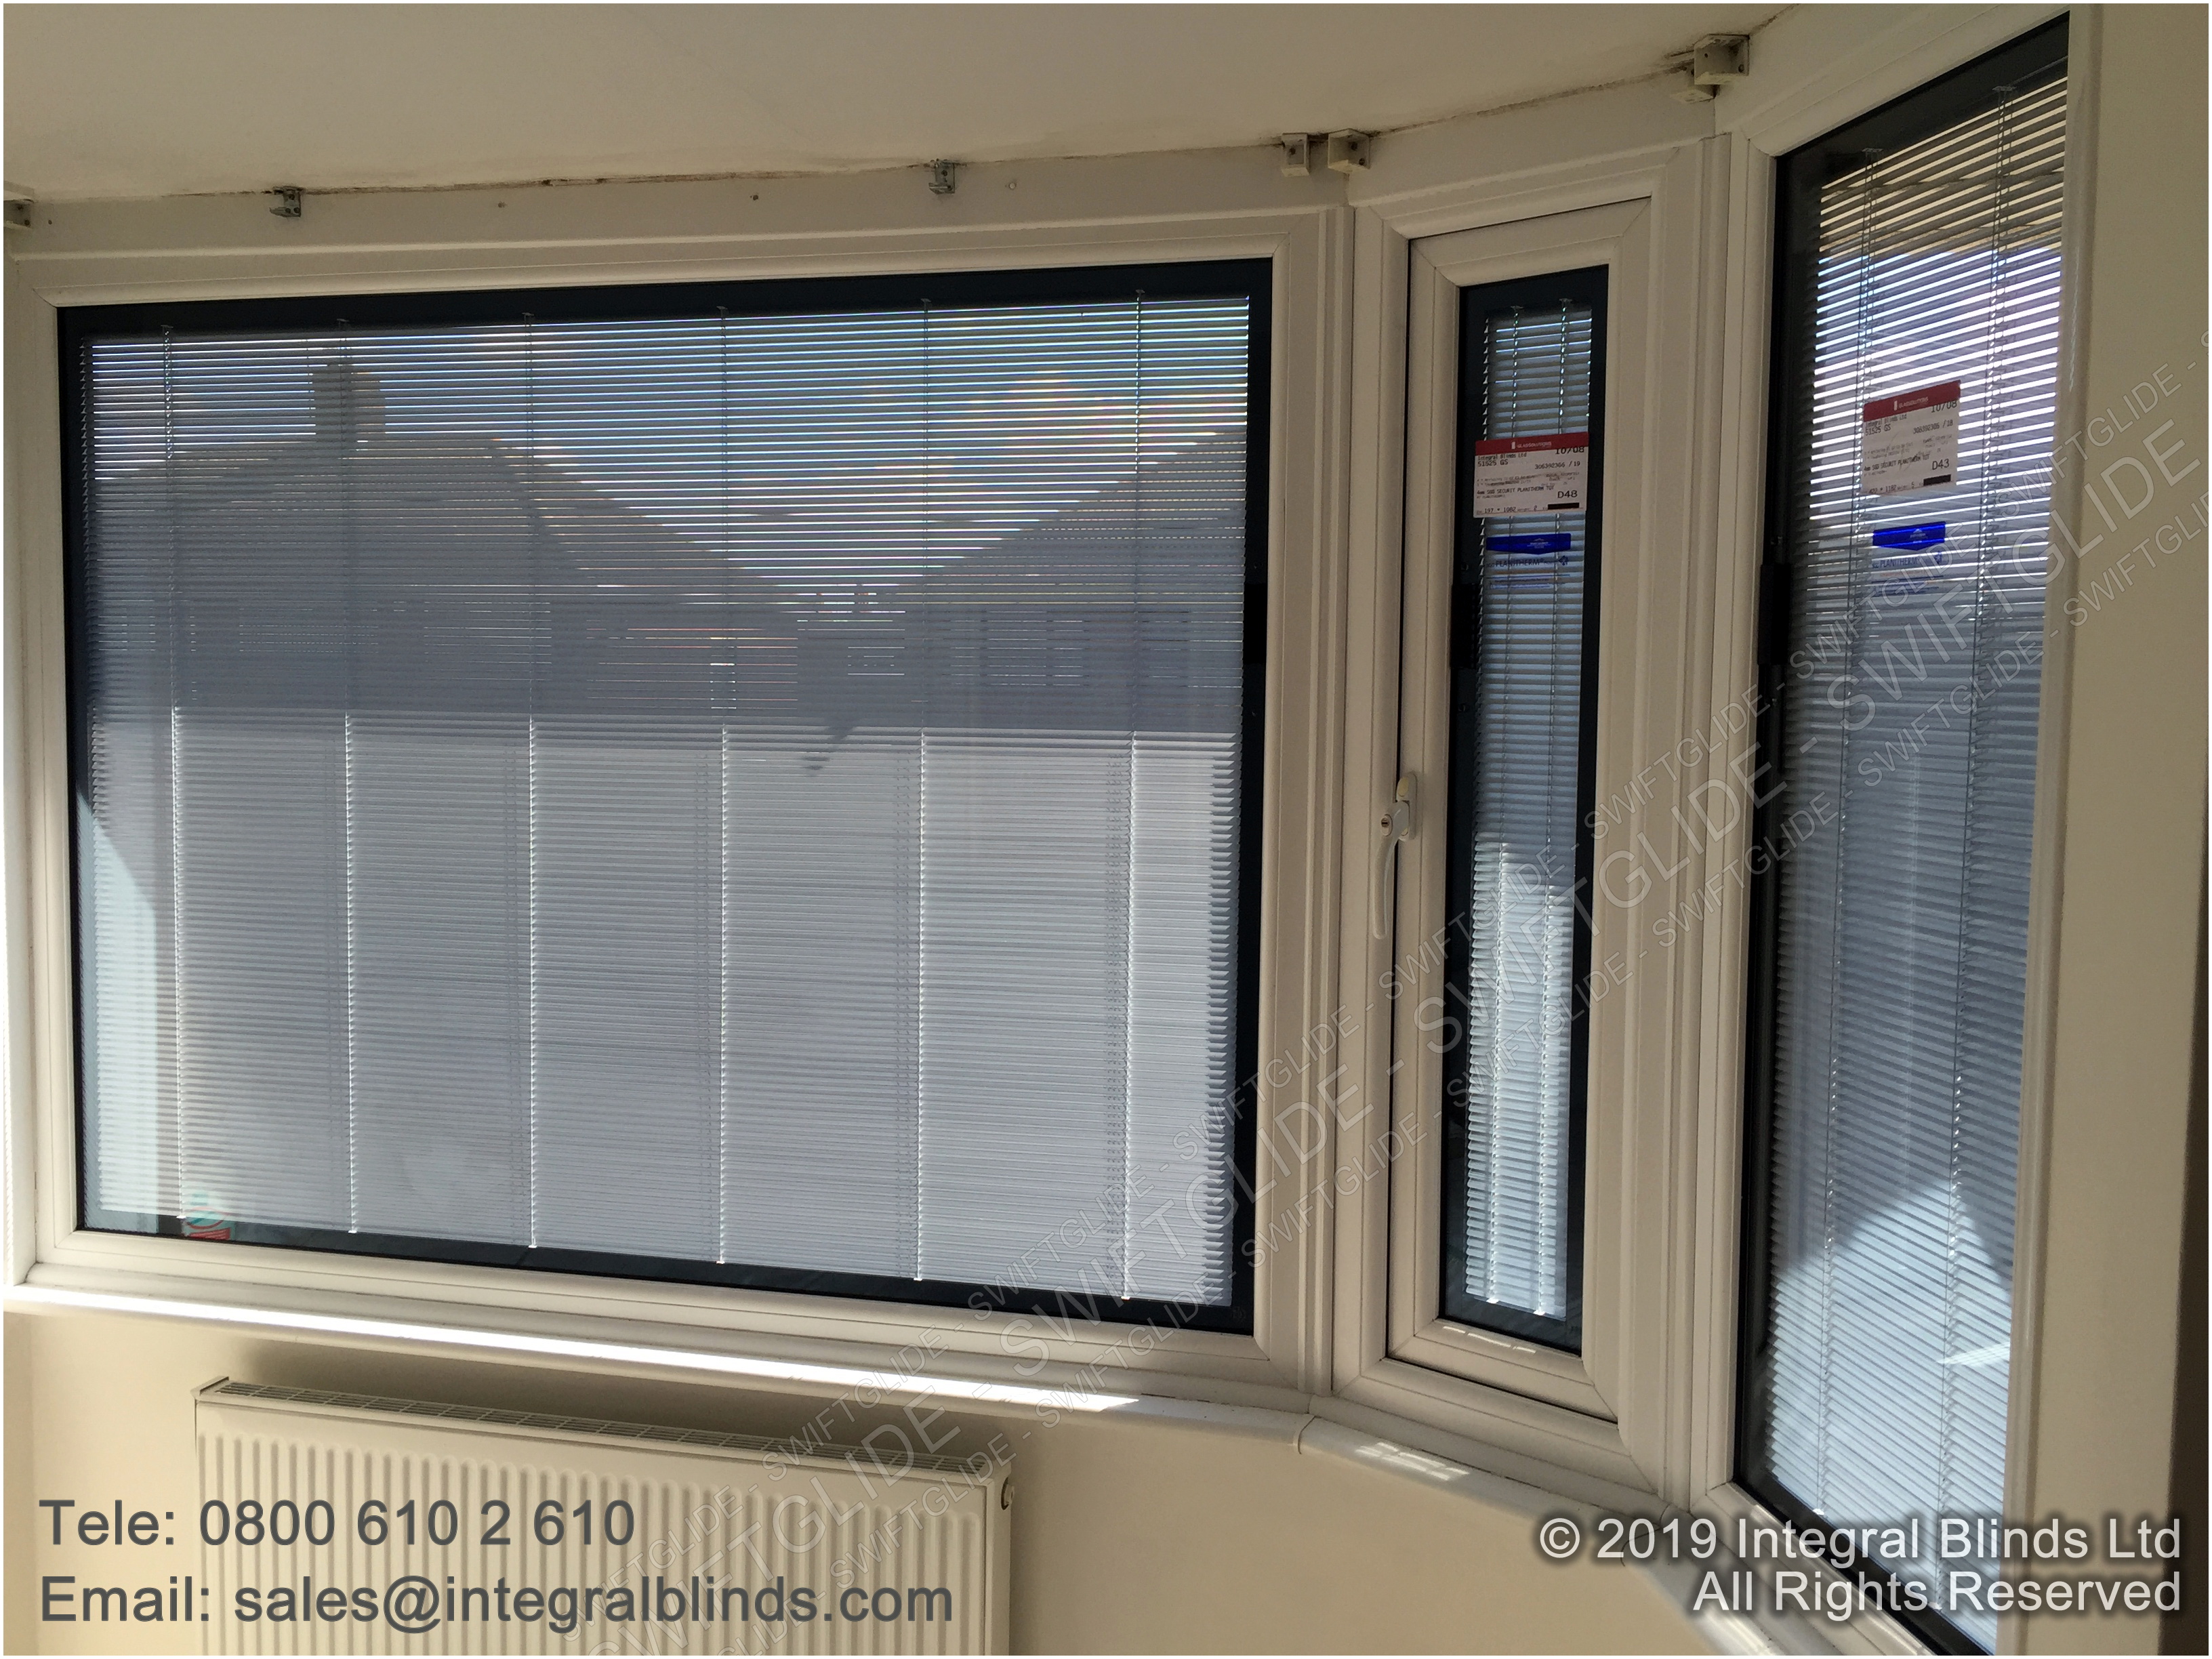 having removed the original sealed units we install the new integral blinds sealed units